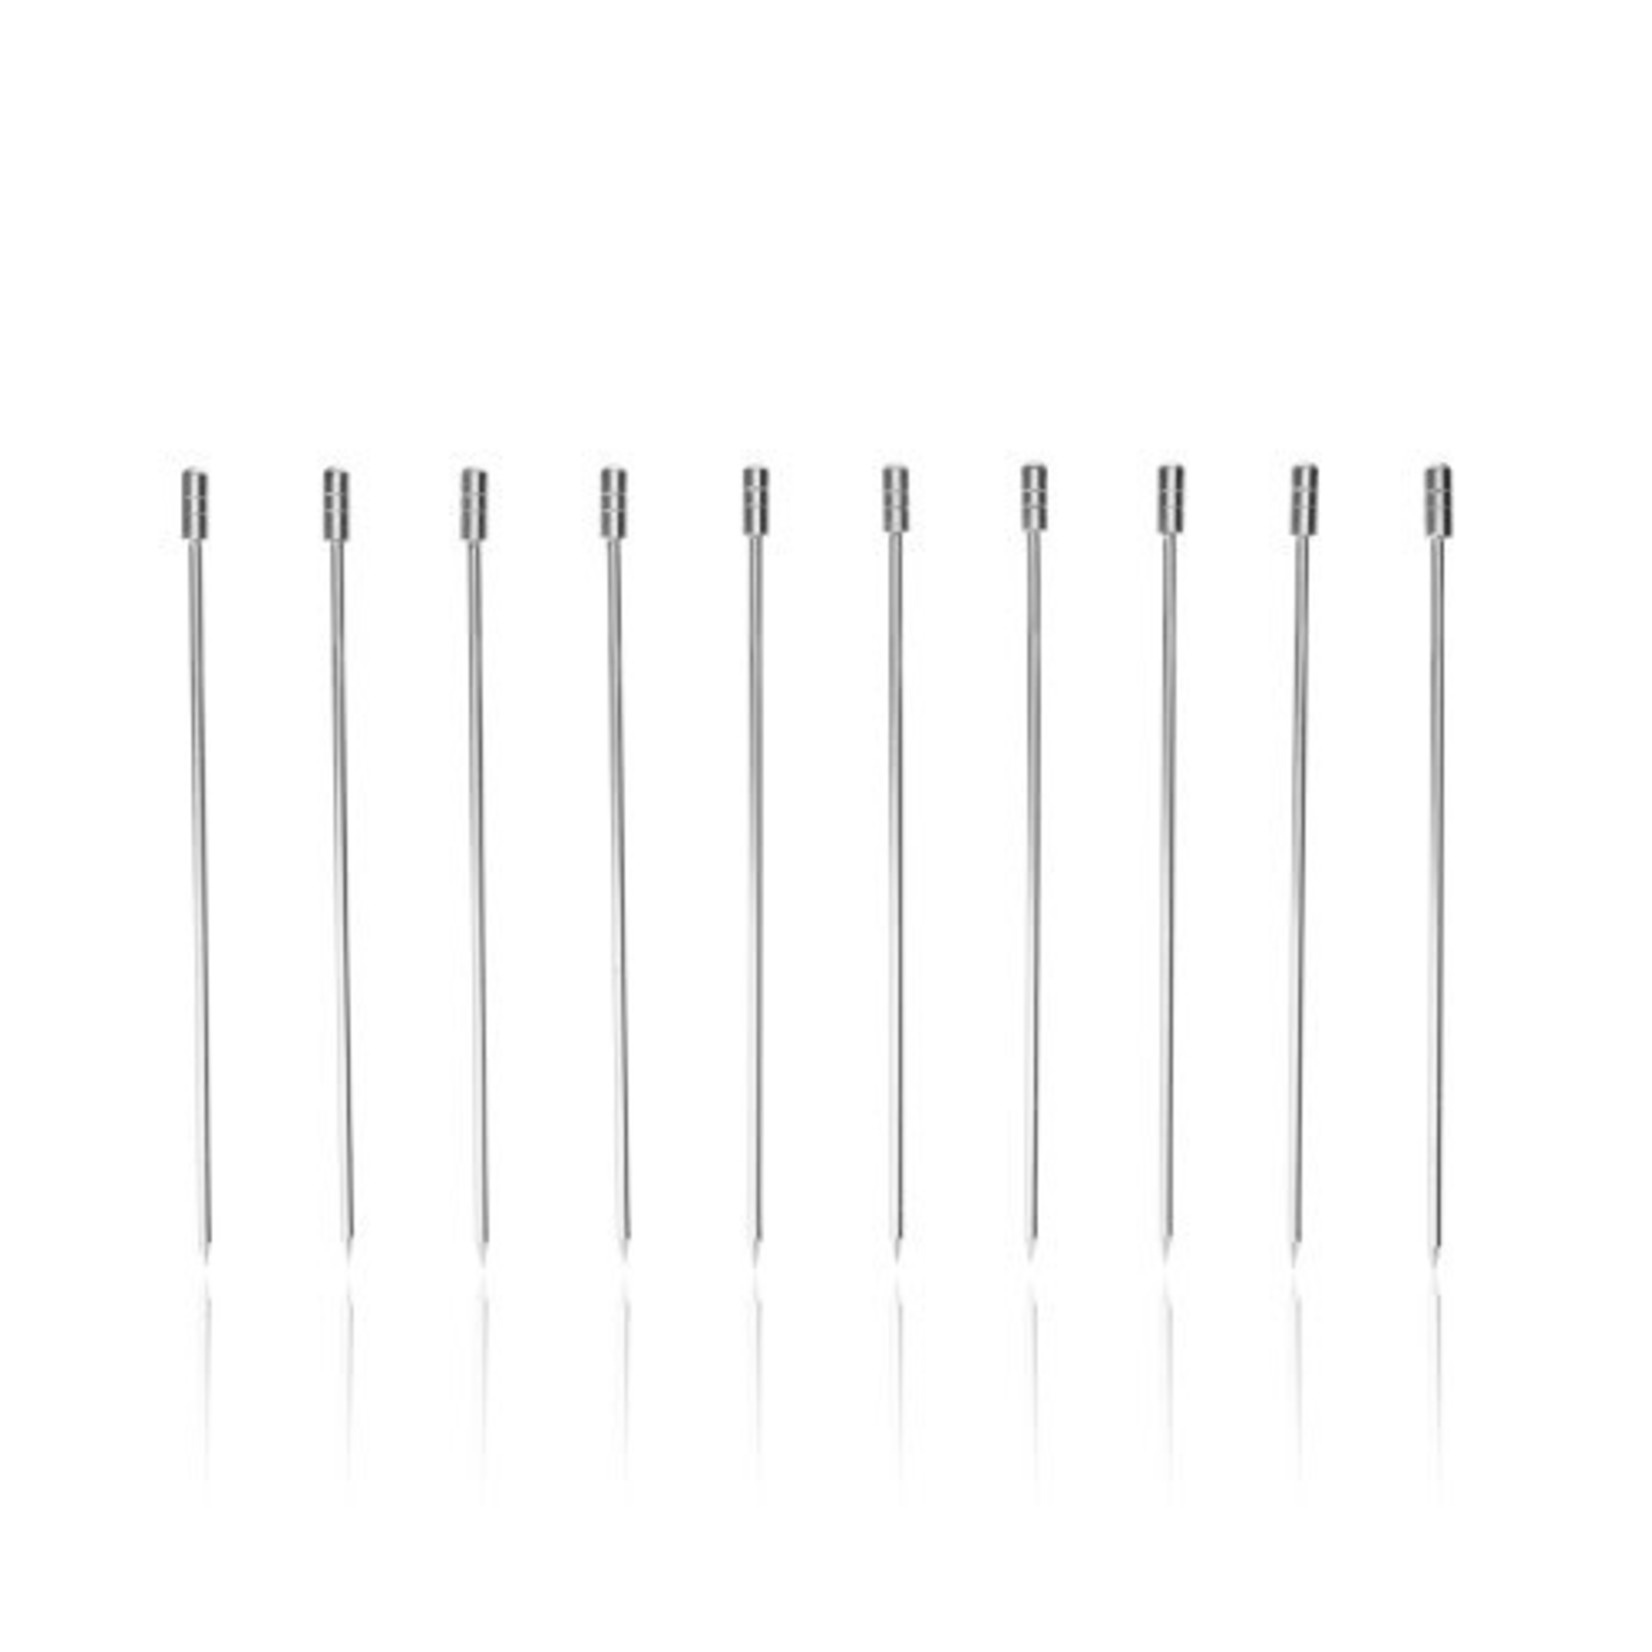 Stainless Steel Cocktail Picks - Set of 10